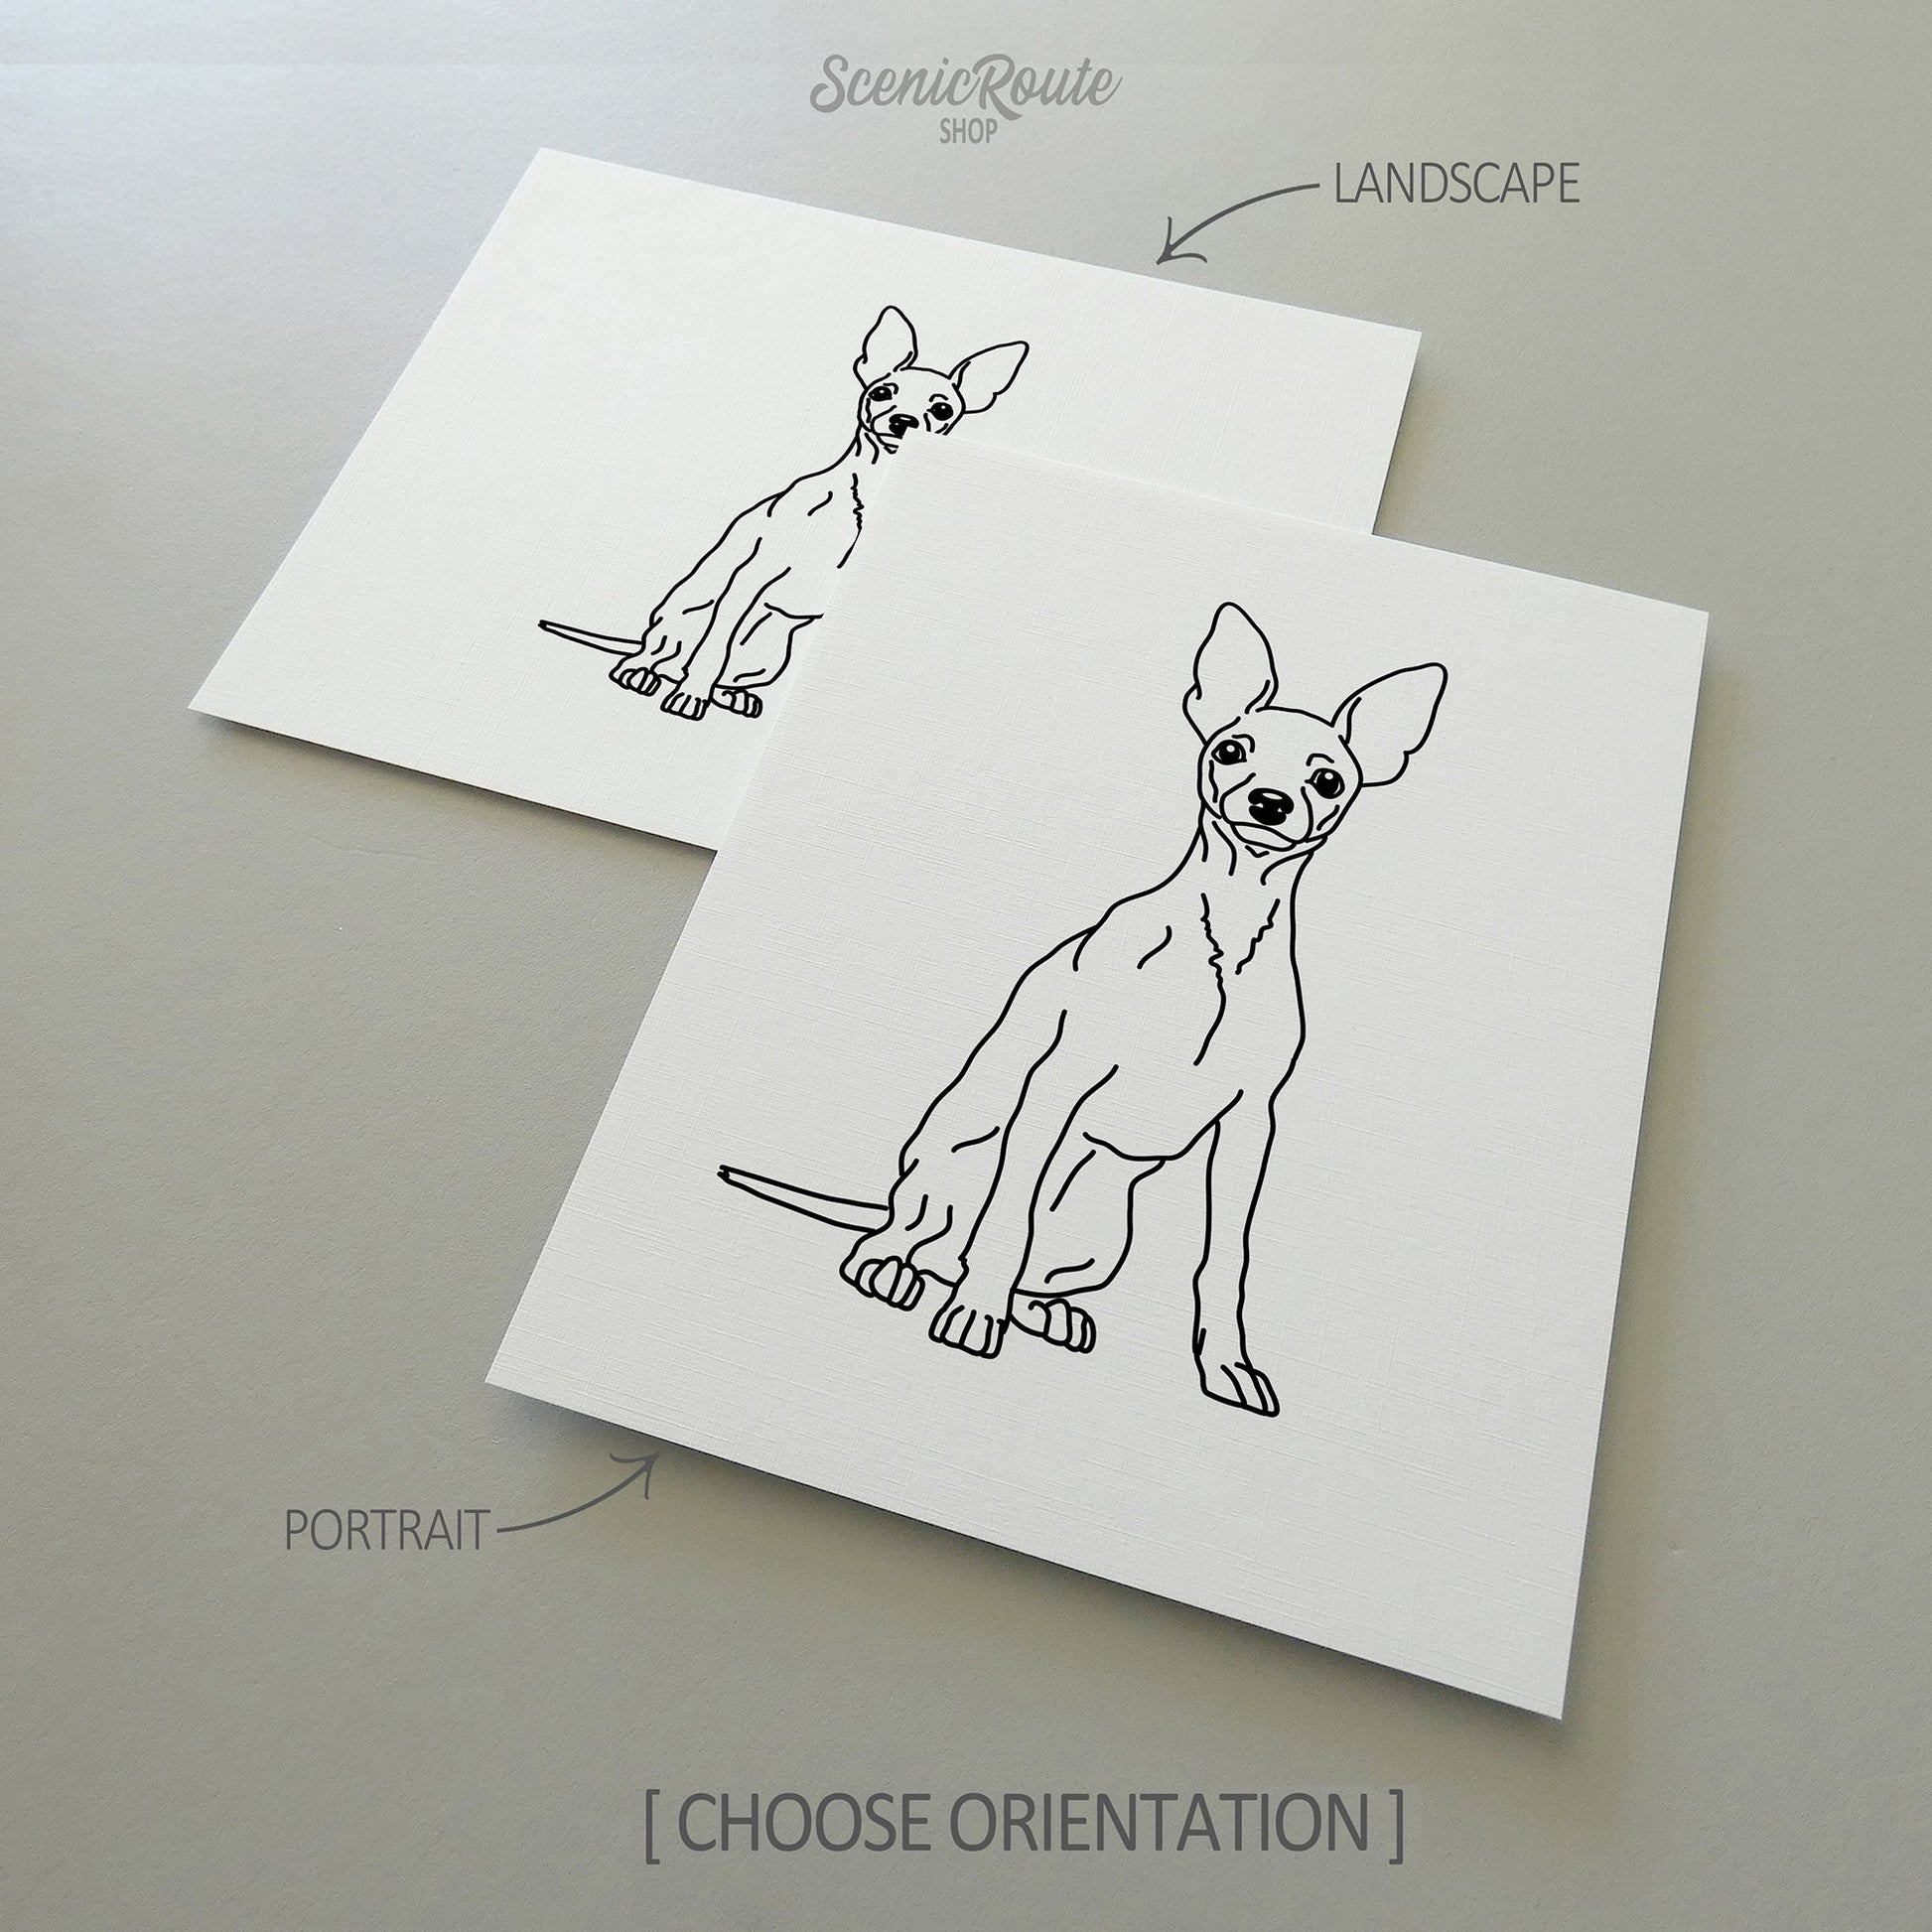 Two line art drawings of a Miniature Pinscher dog on white linen paper with a gray background.  The pieces are shown in portrait and landscape orientation for the available art print options.